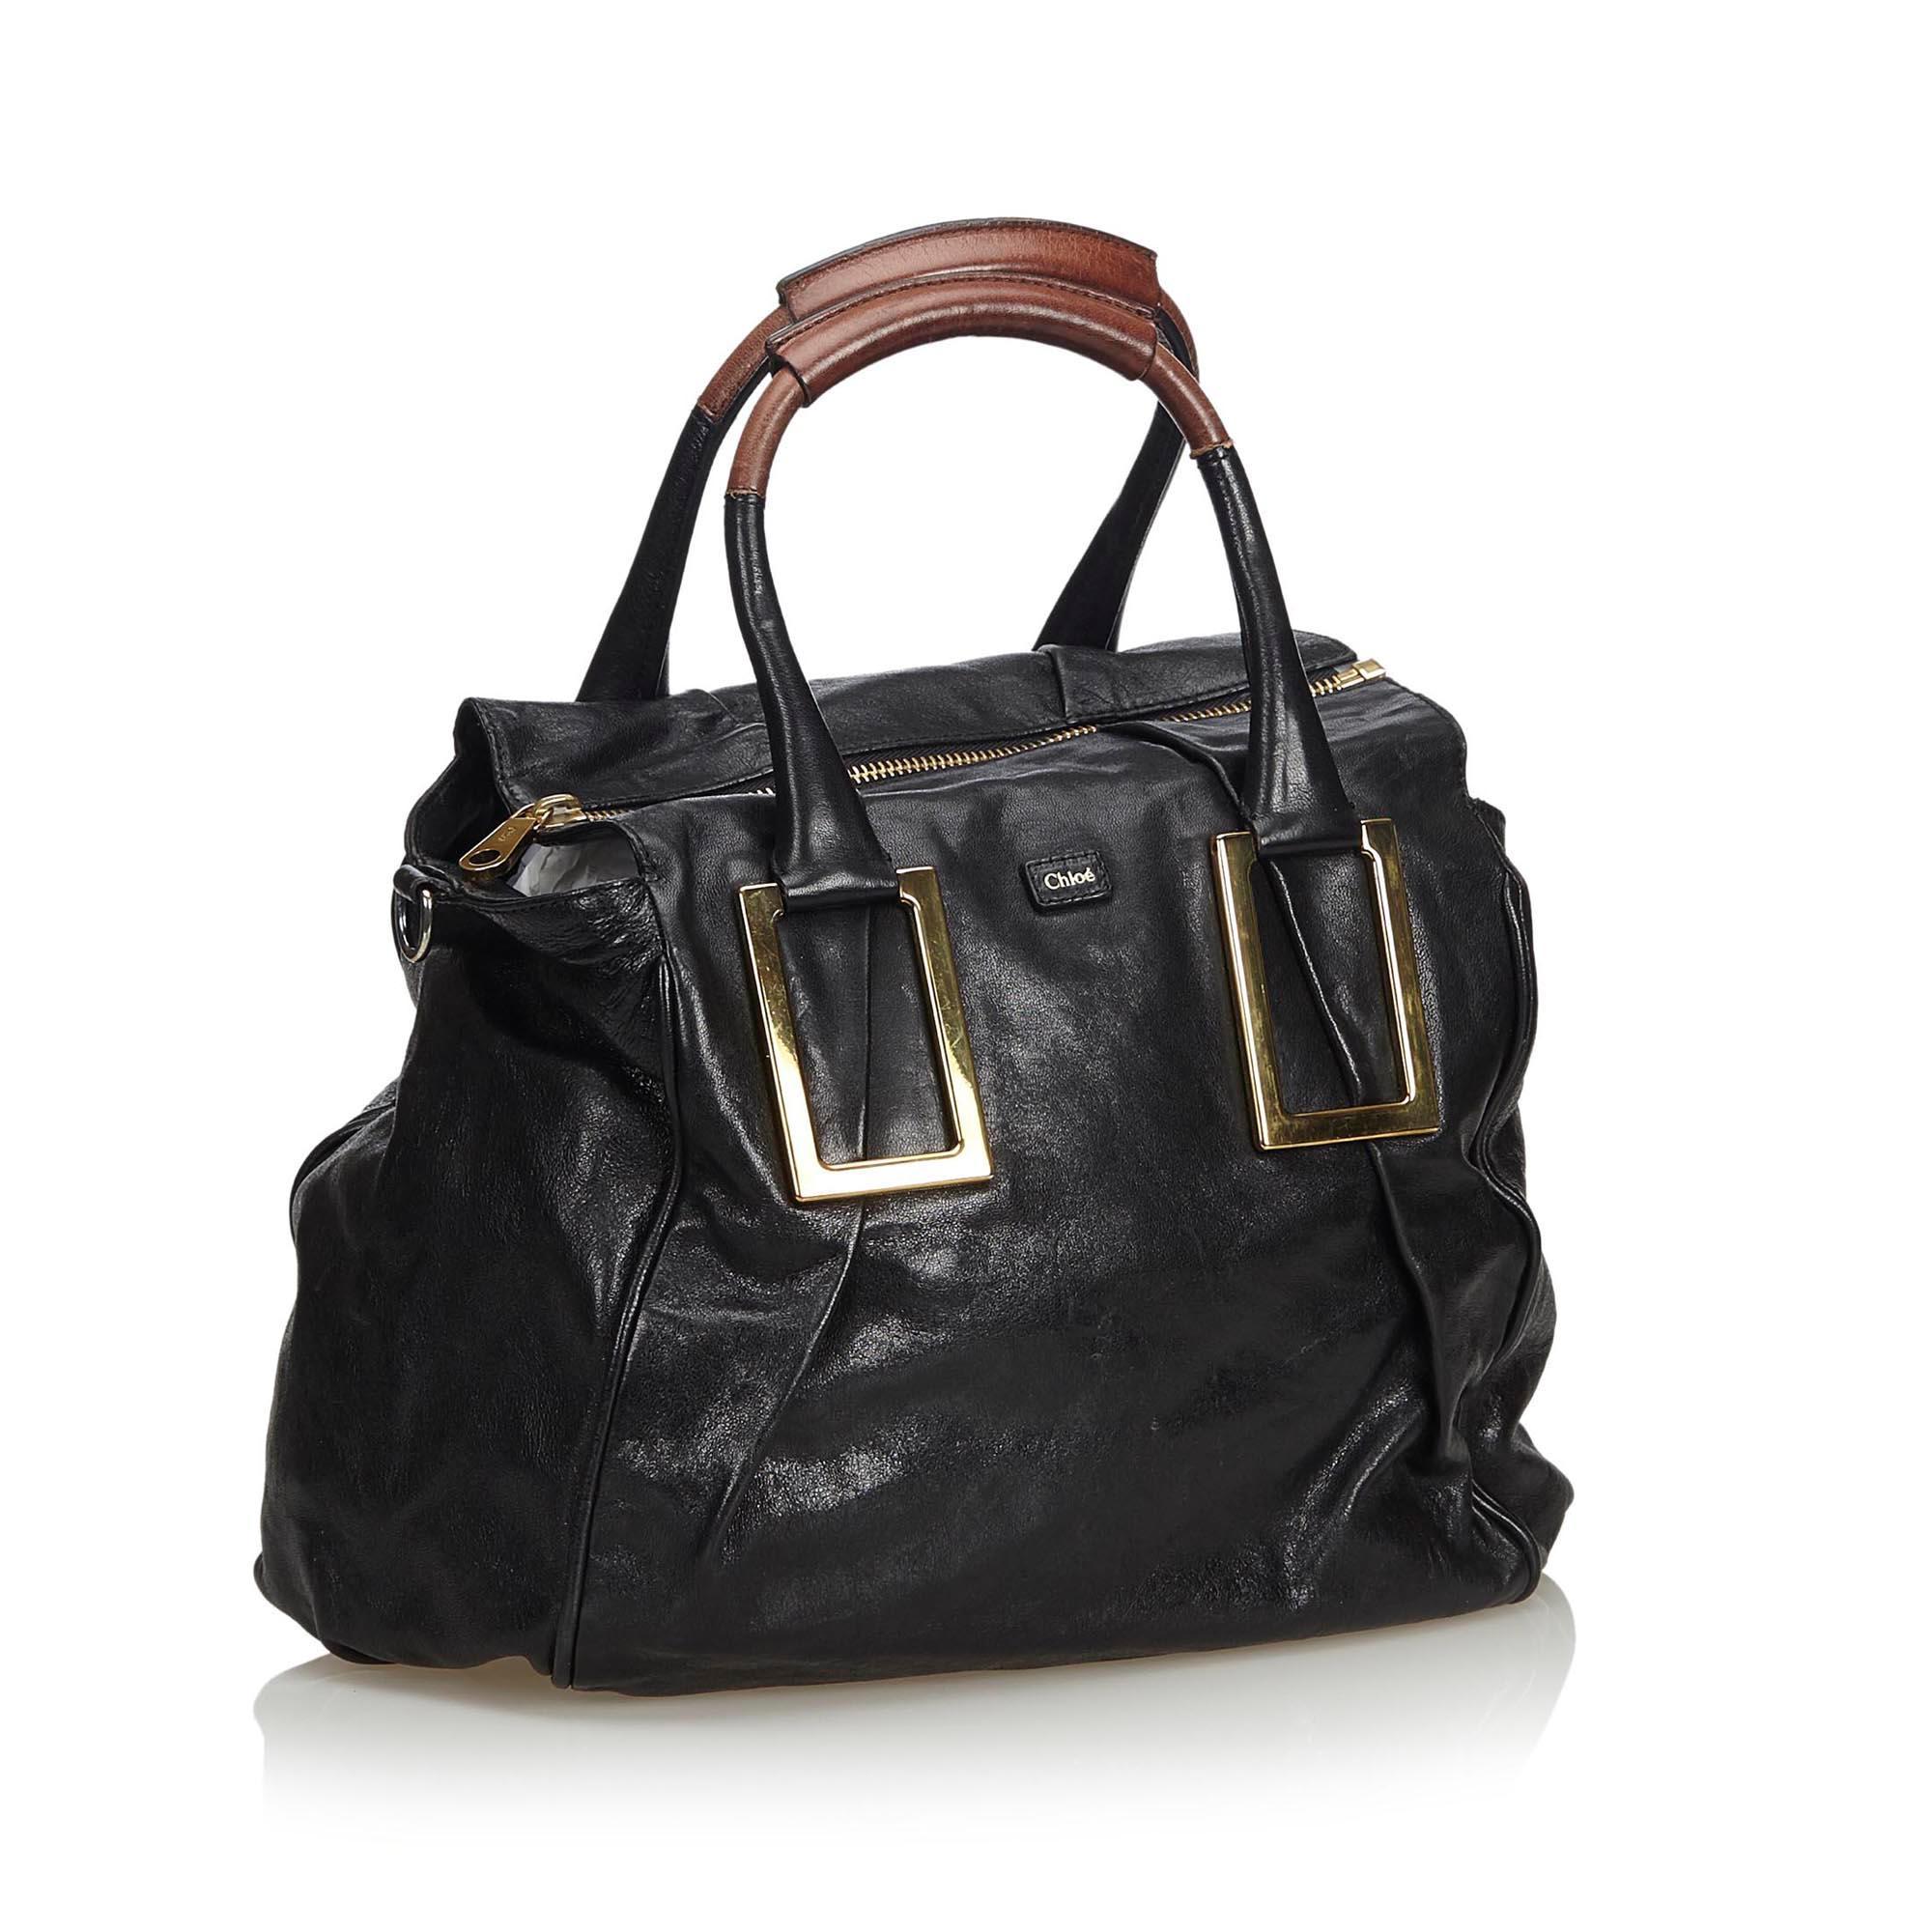 The Ethel features a leather body, rolled handles, gold-tone hardware, a top zip closure, and an interior zip pocket. It carries as B+ condition rating.

Inclusions: 
This item does not come with inclusions.

Dimensions:
Length: 25.00 cm
Width: